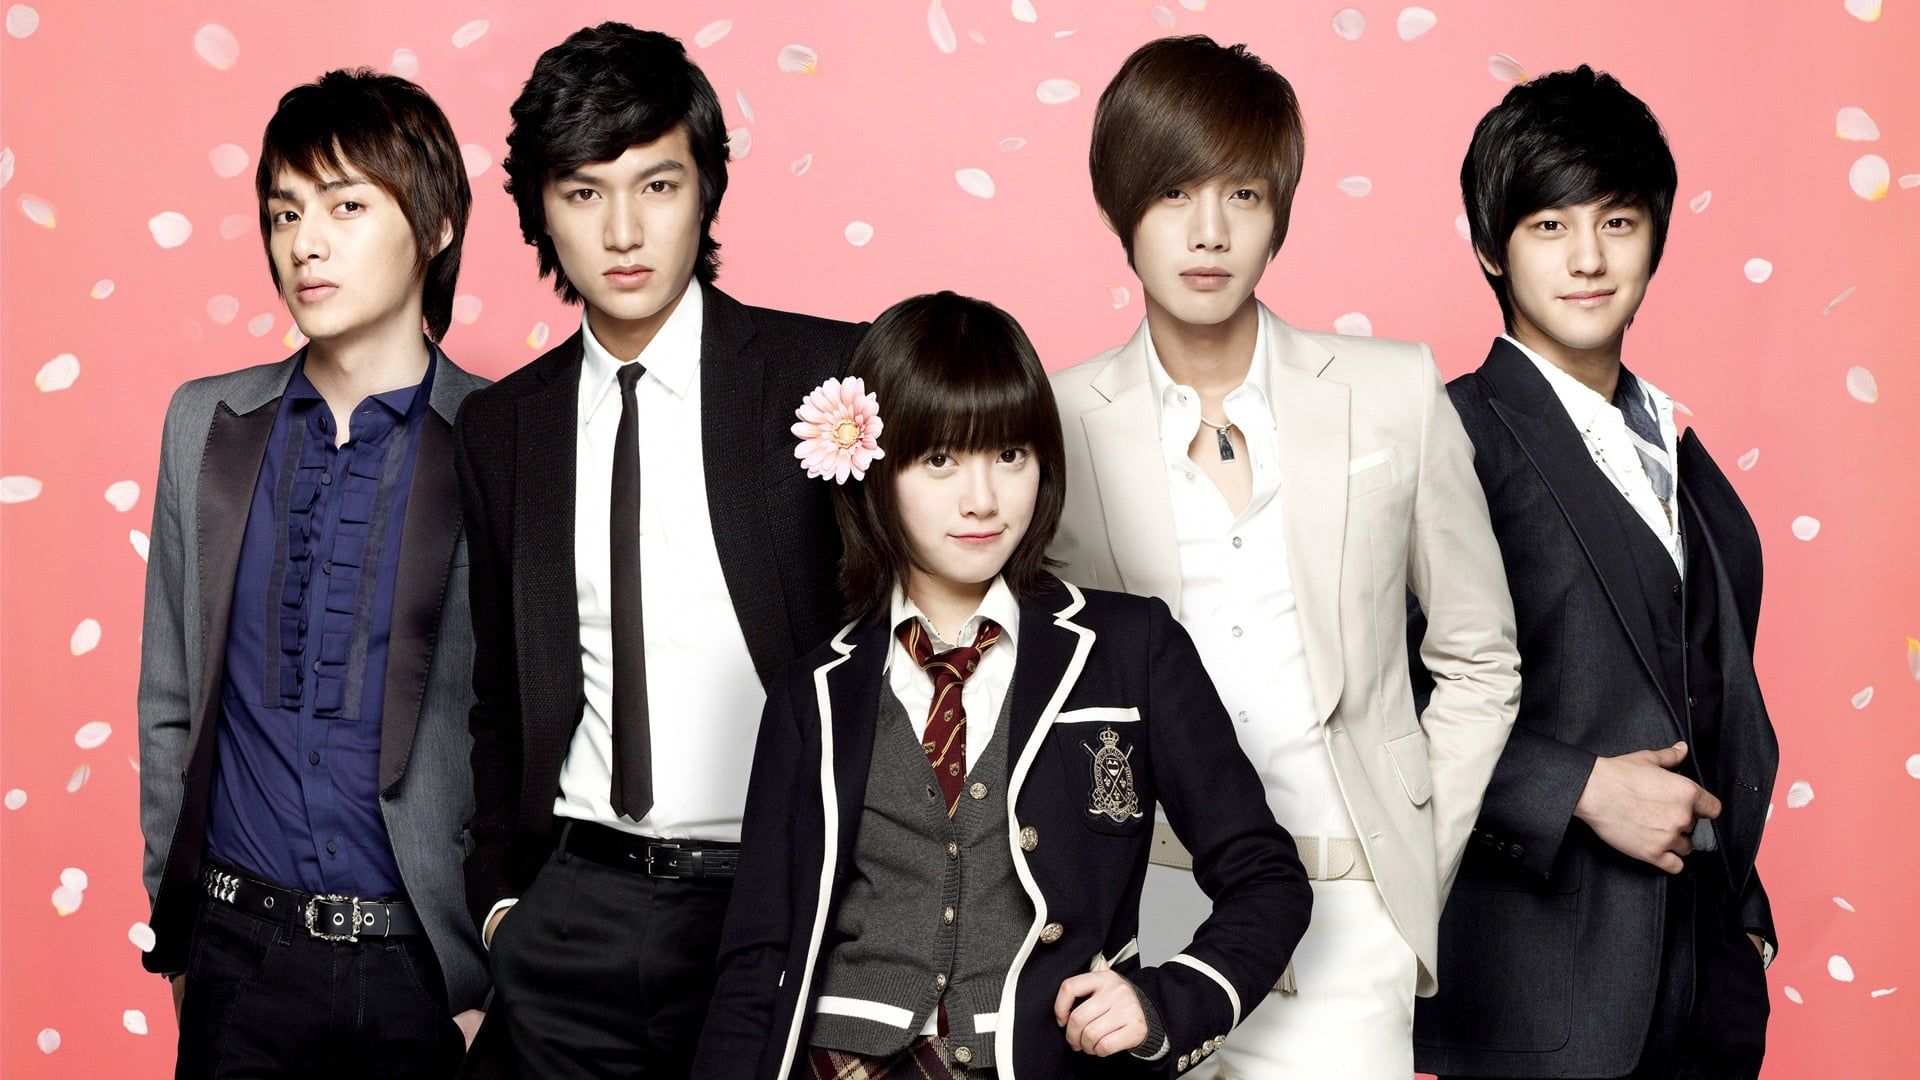 Boys Over Flowers background